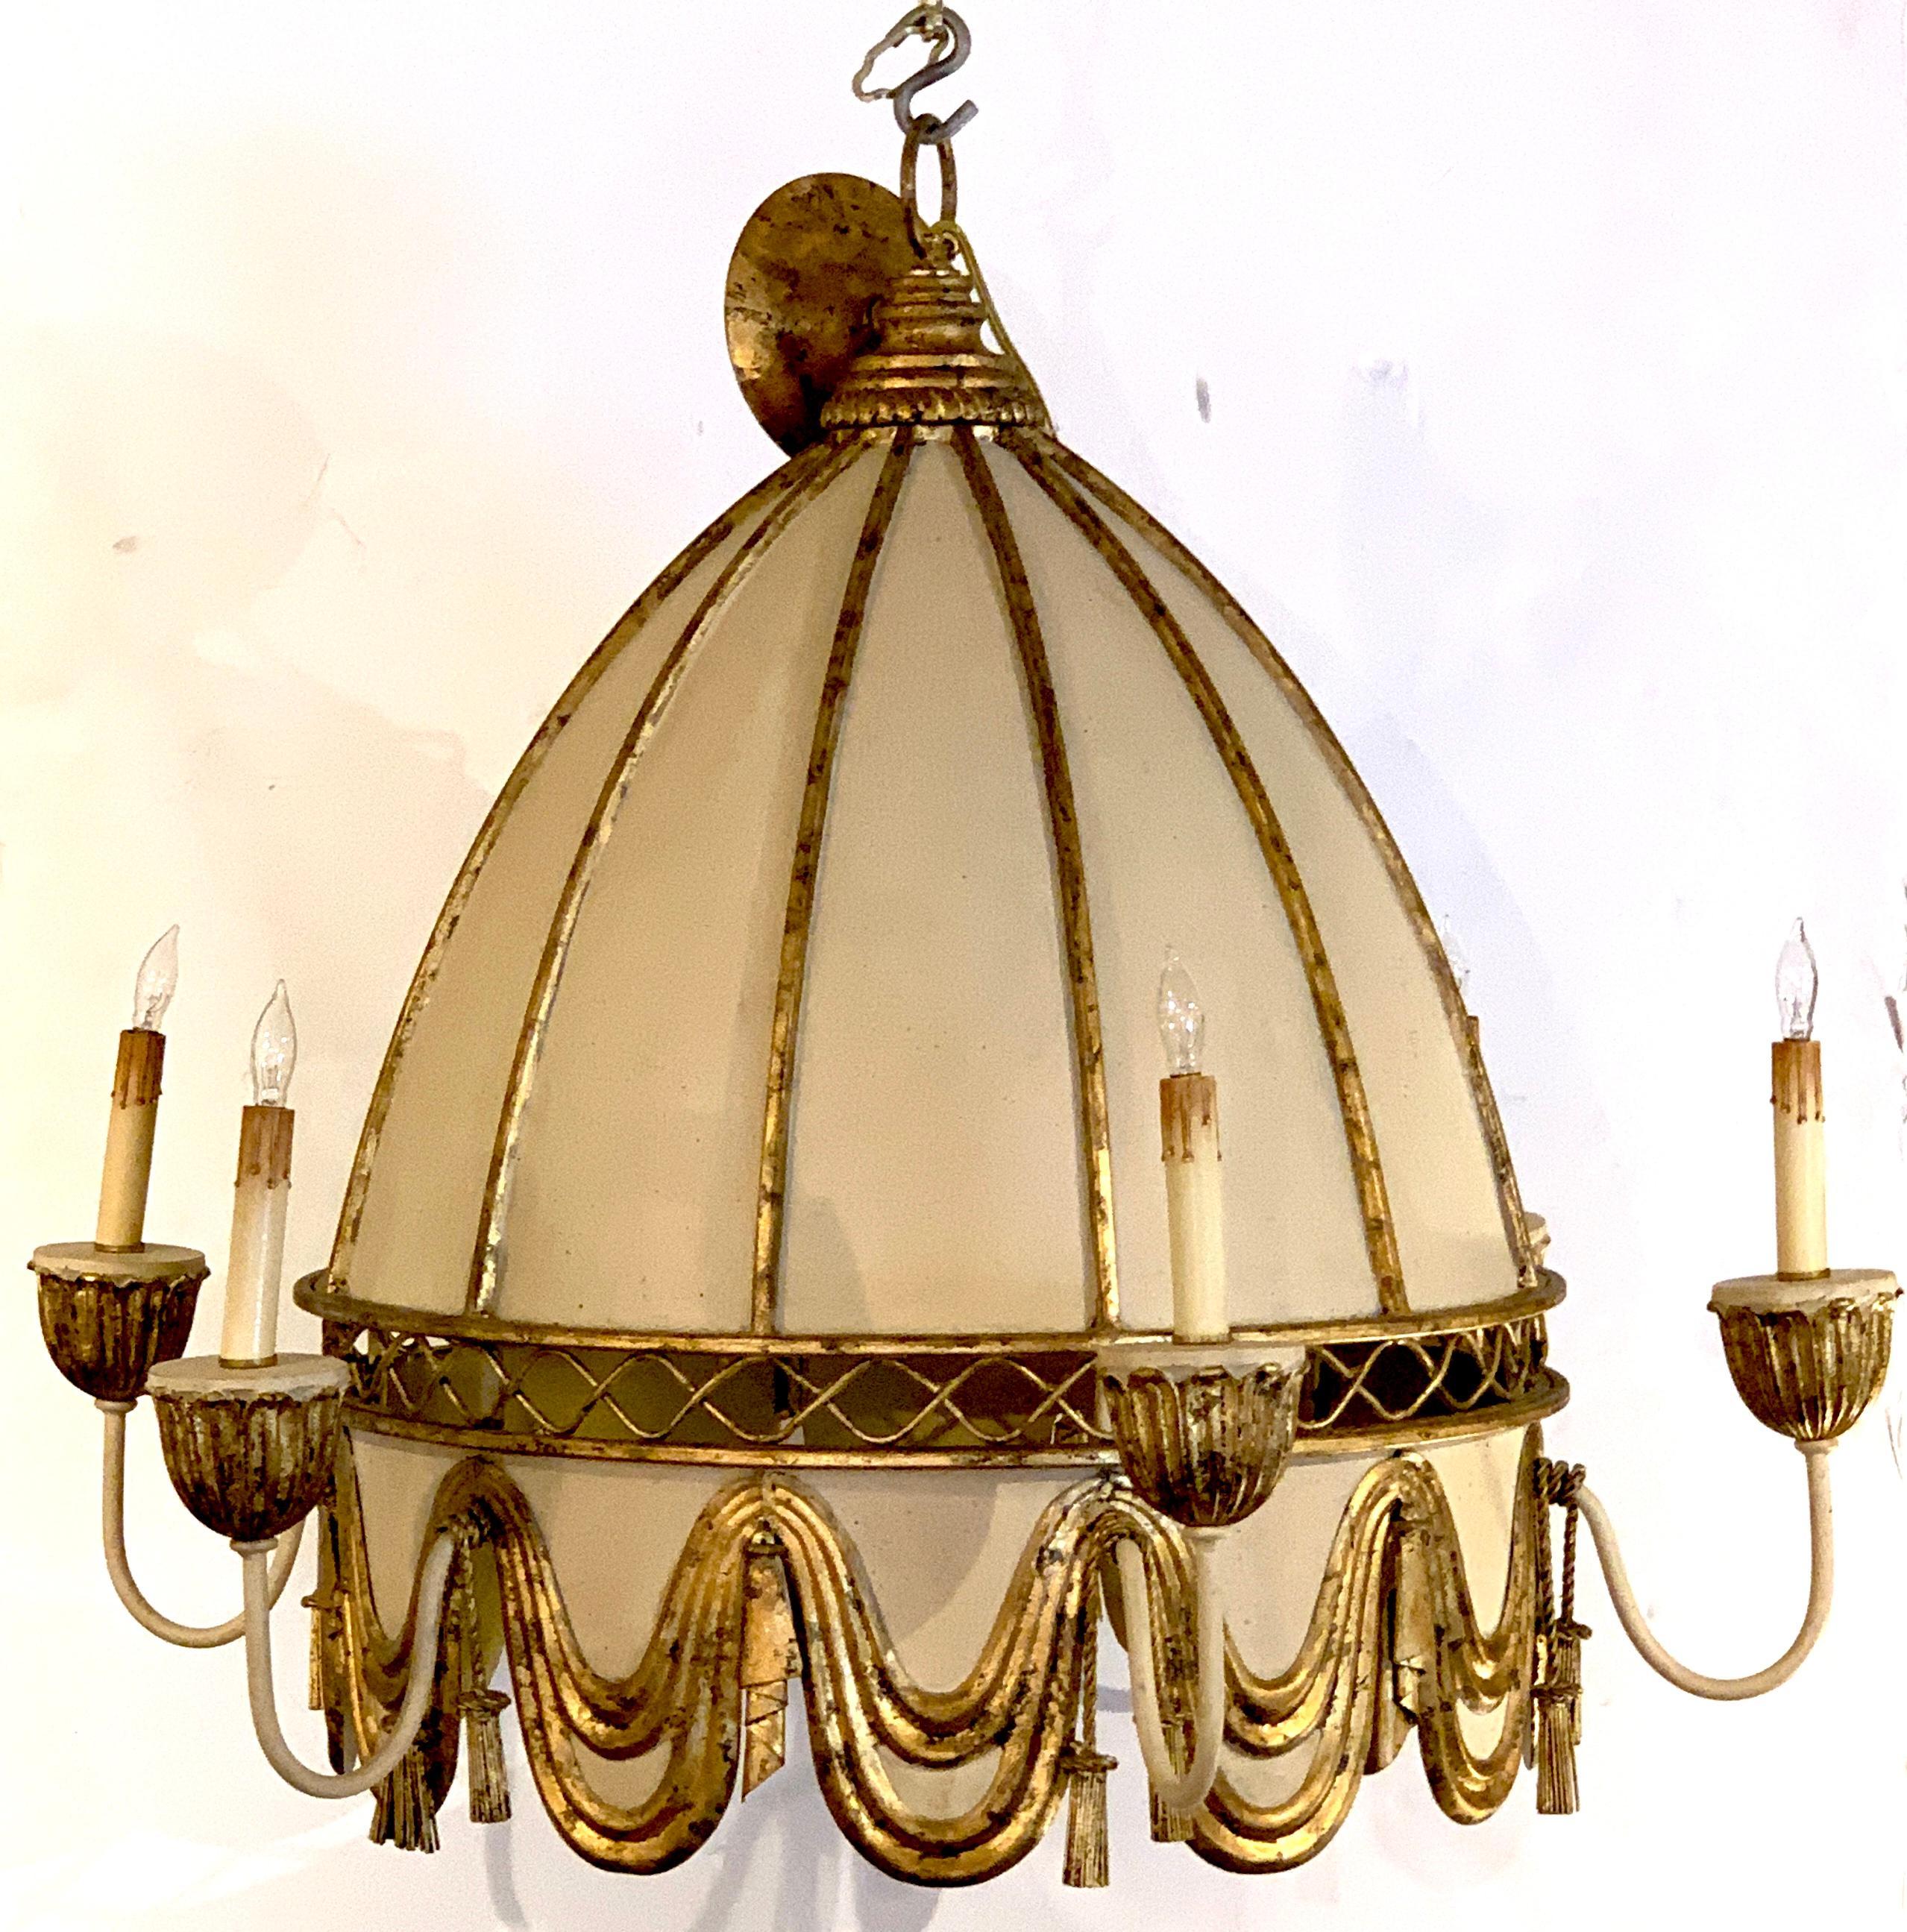 European Neoclassical Polychromed Tole Pagoda Style Chandelier